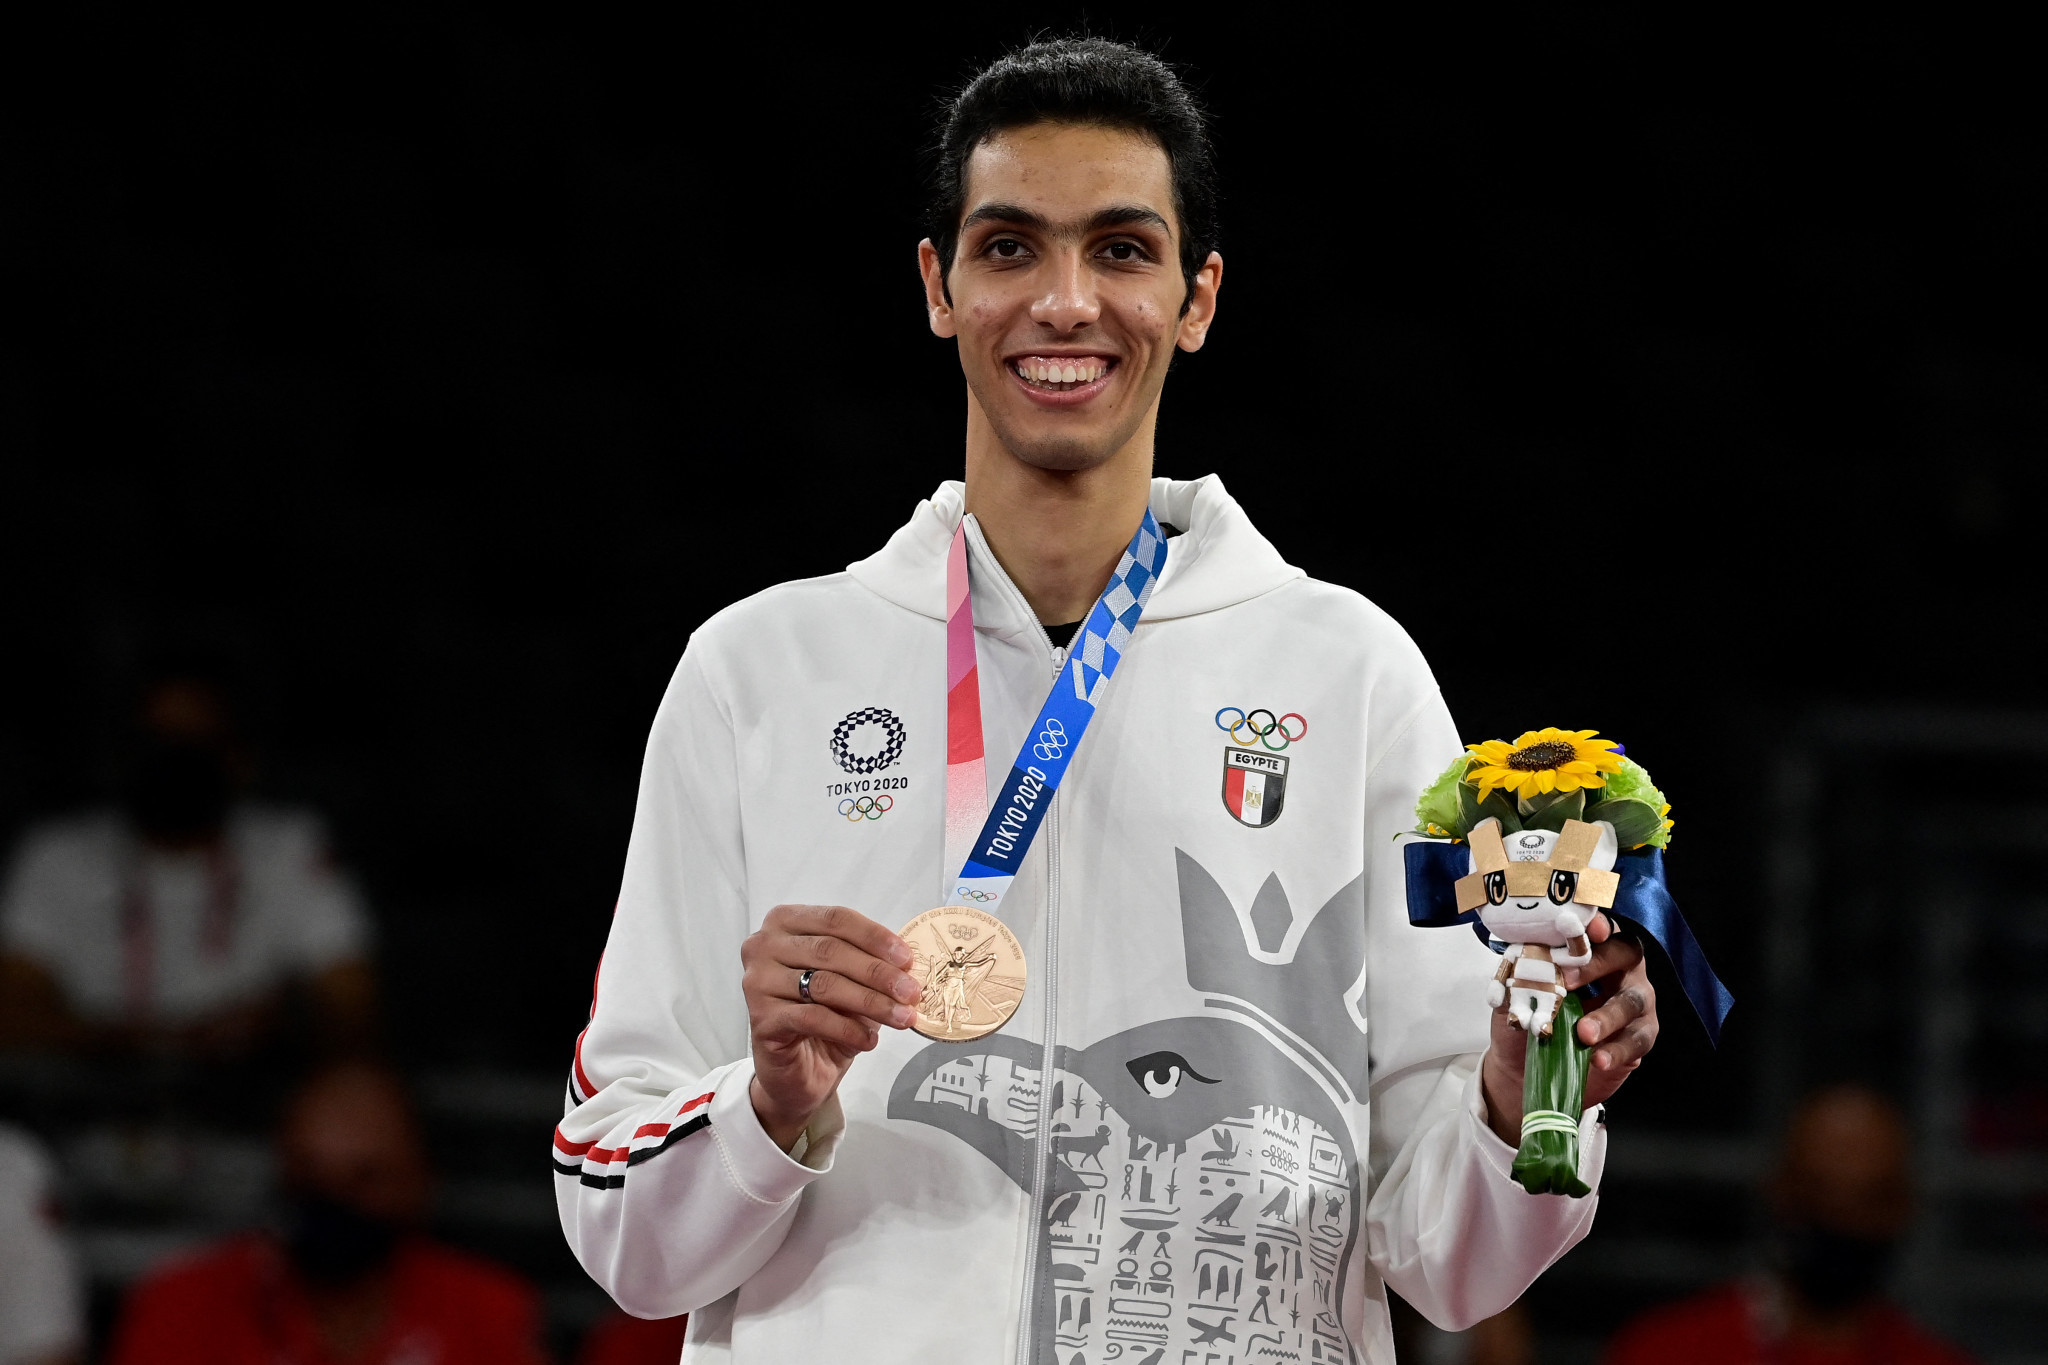  Seif Eissa of Egypt is an Olympic bronze medallist ©Getty Images